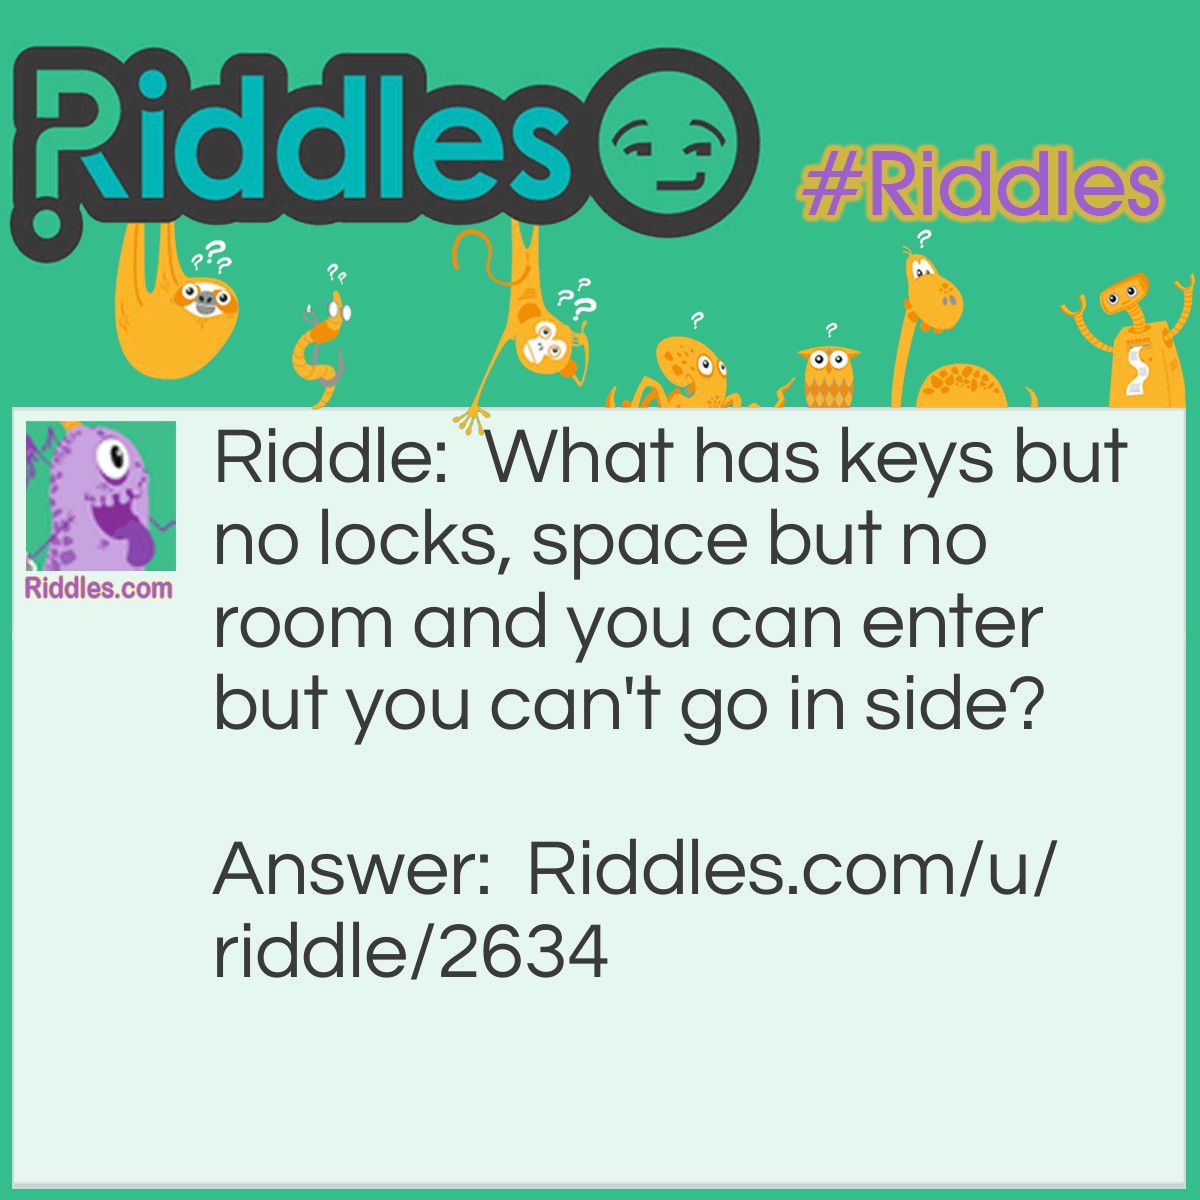 Riddle: What has keys but no locks, space but no room and you can enter but you can't go in side? Answer: A keyboard.